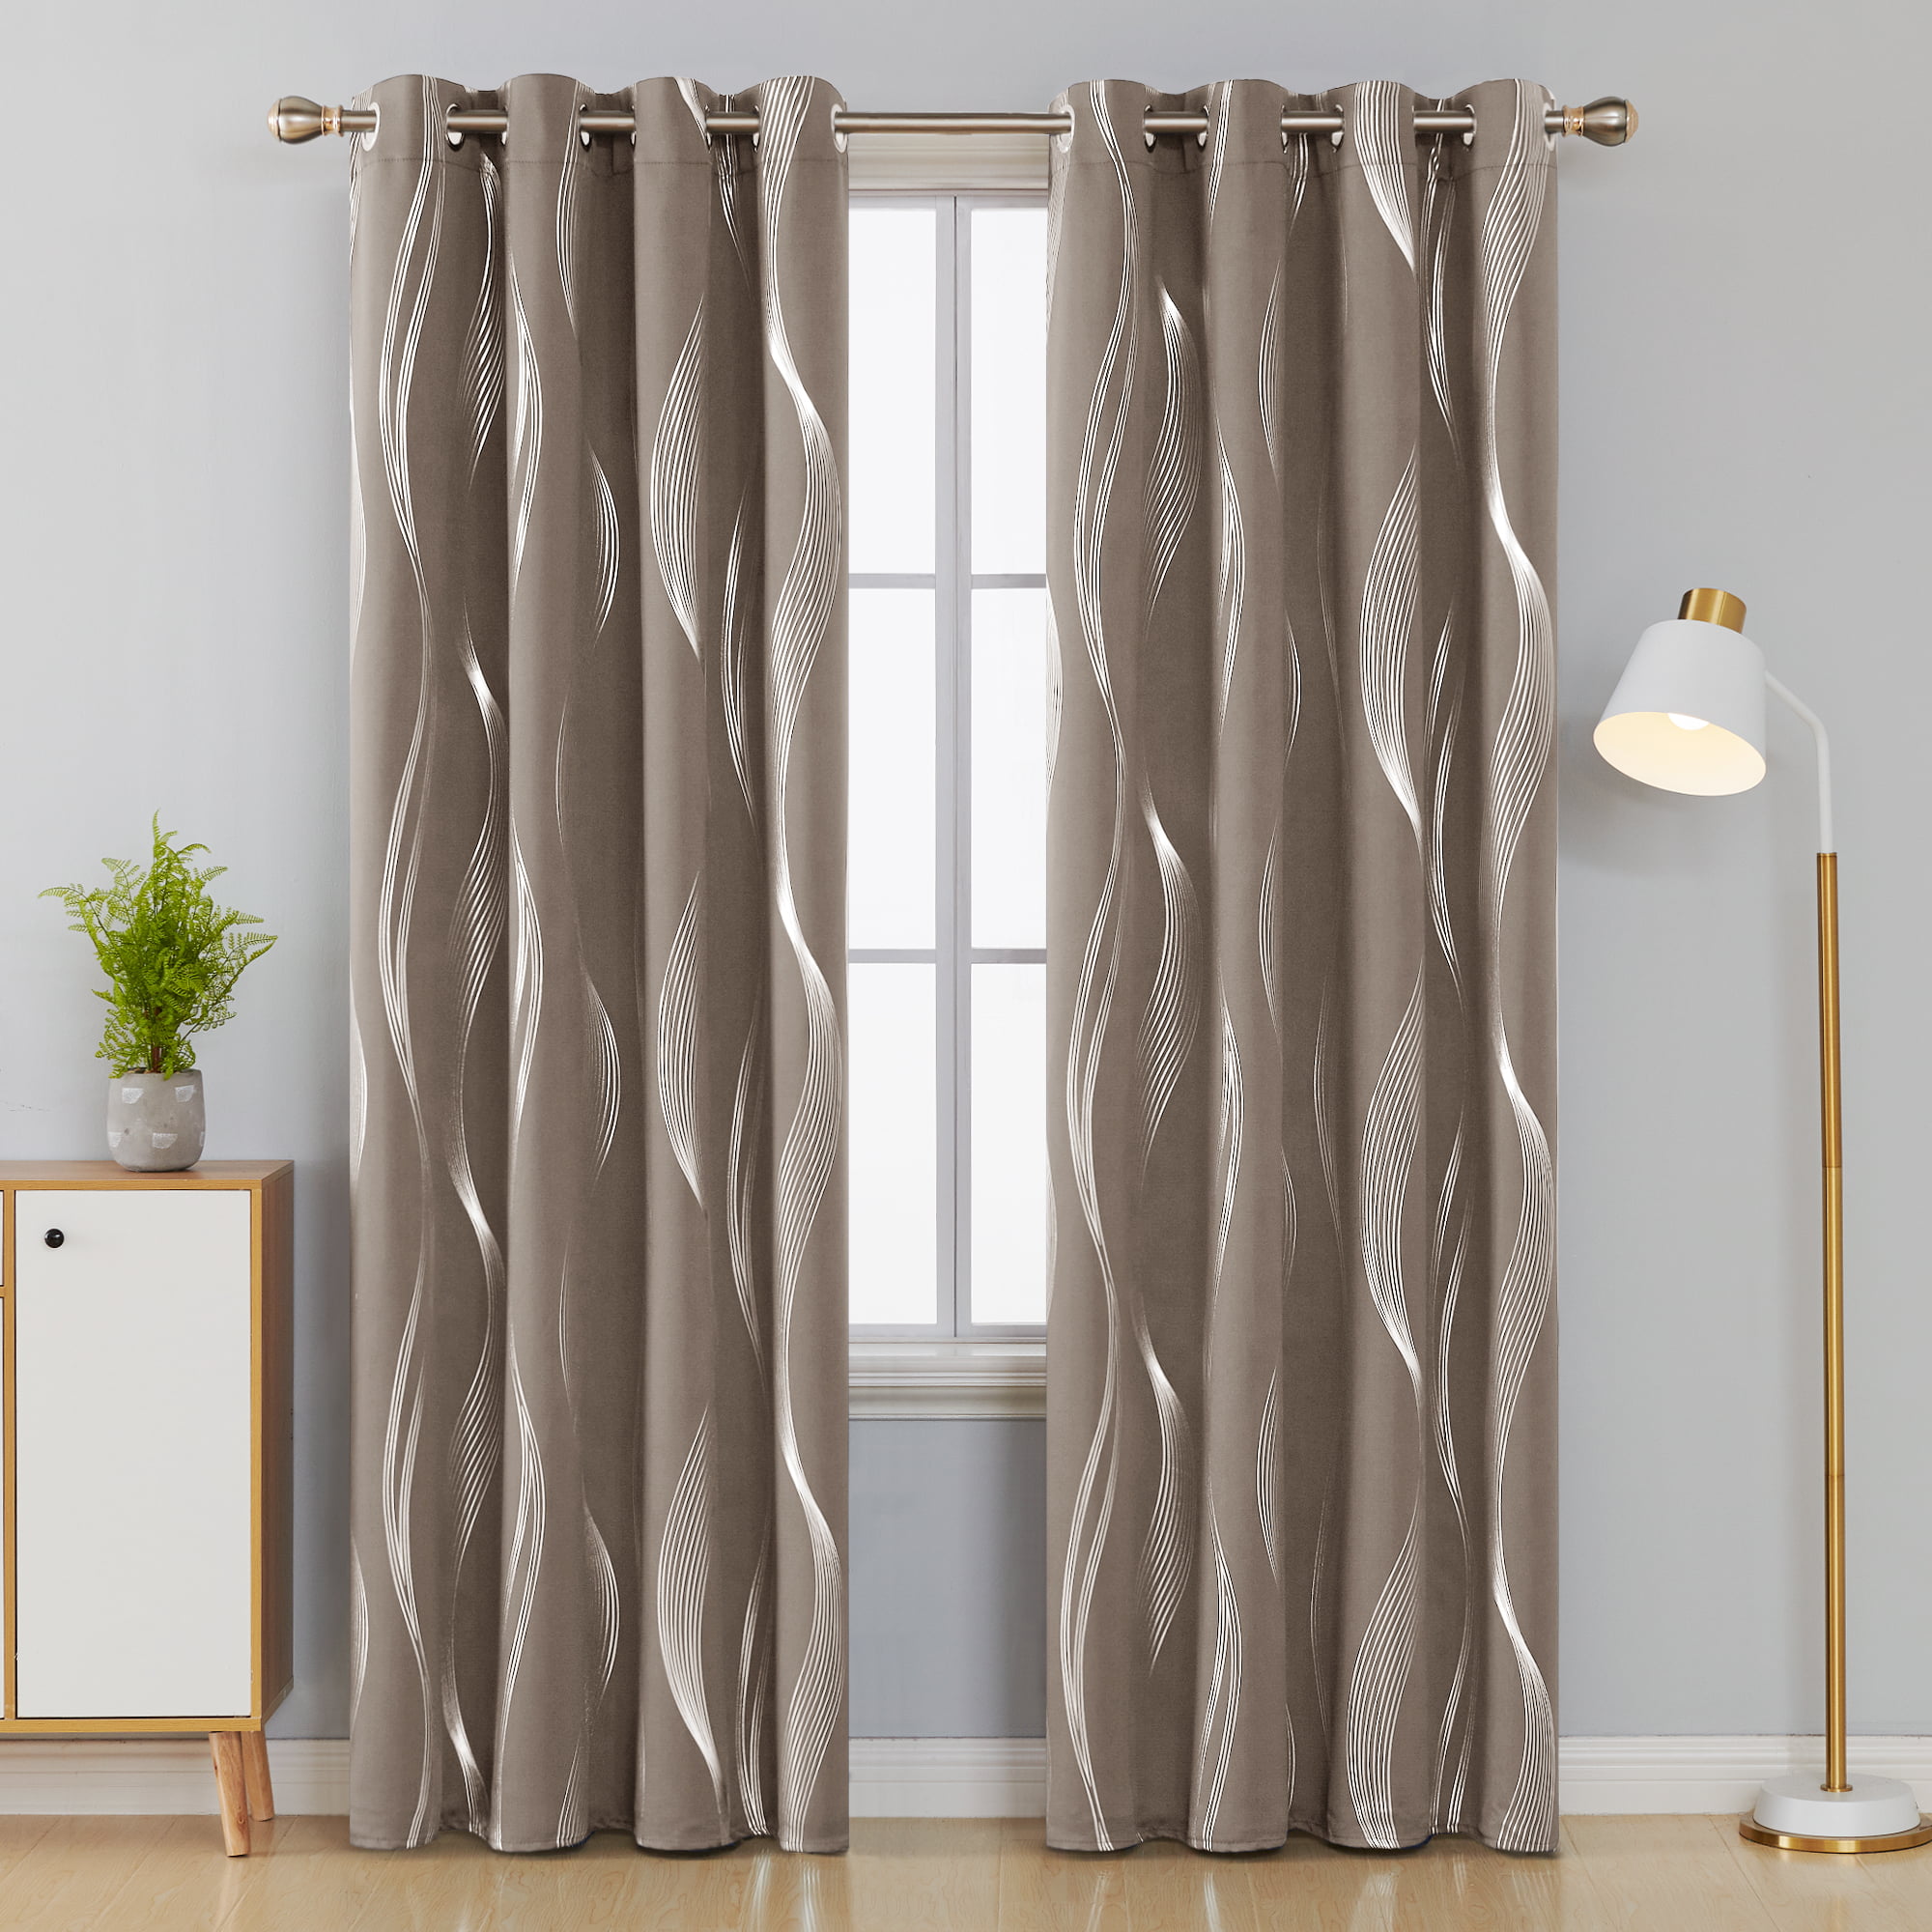 Black Estelar Textiler Geometric Silver Wave Line Pattern Window Curtain Valance Rod Pocket 38 Inch by 18 Inch Pack of 2 Pieces